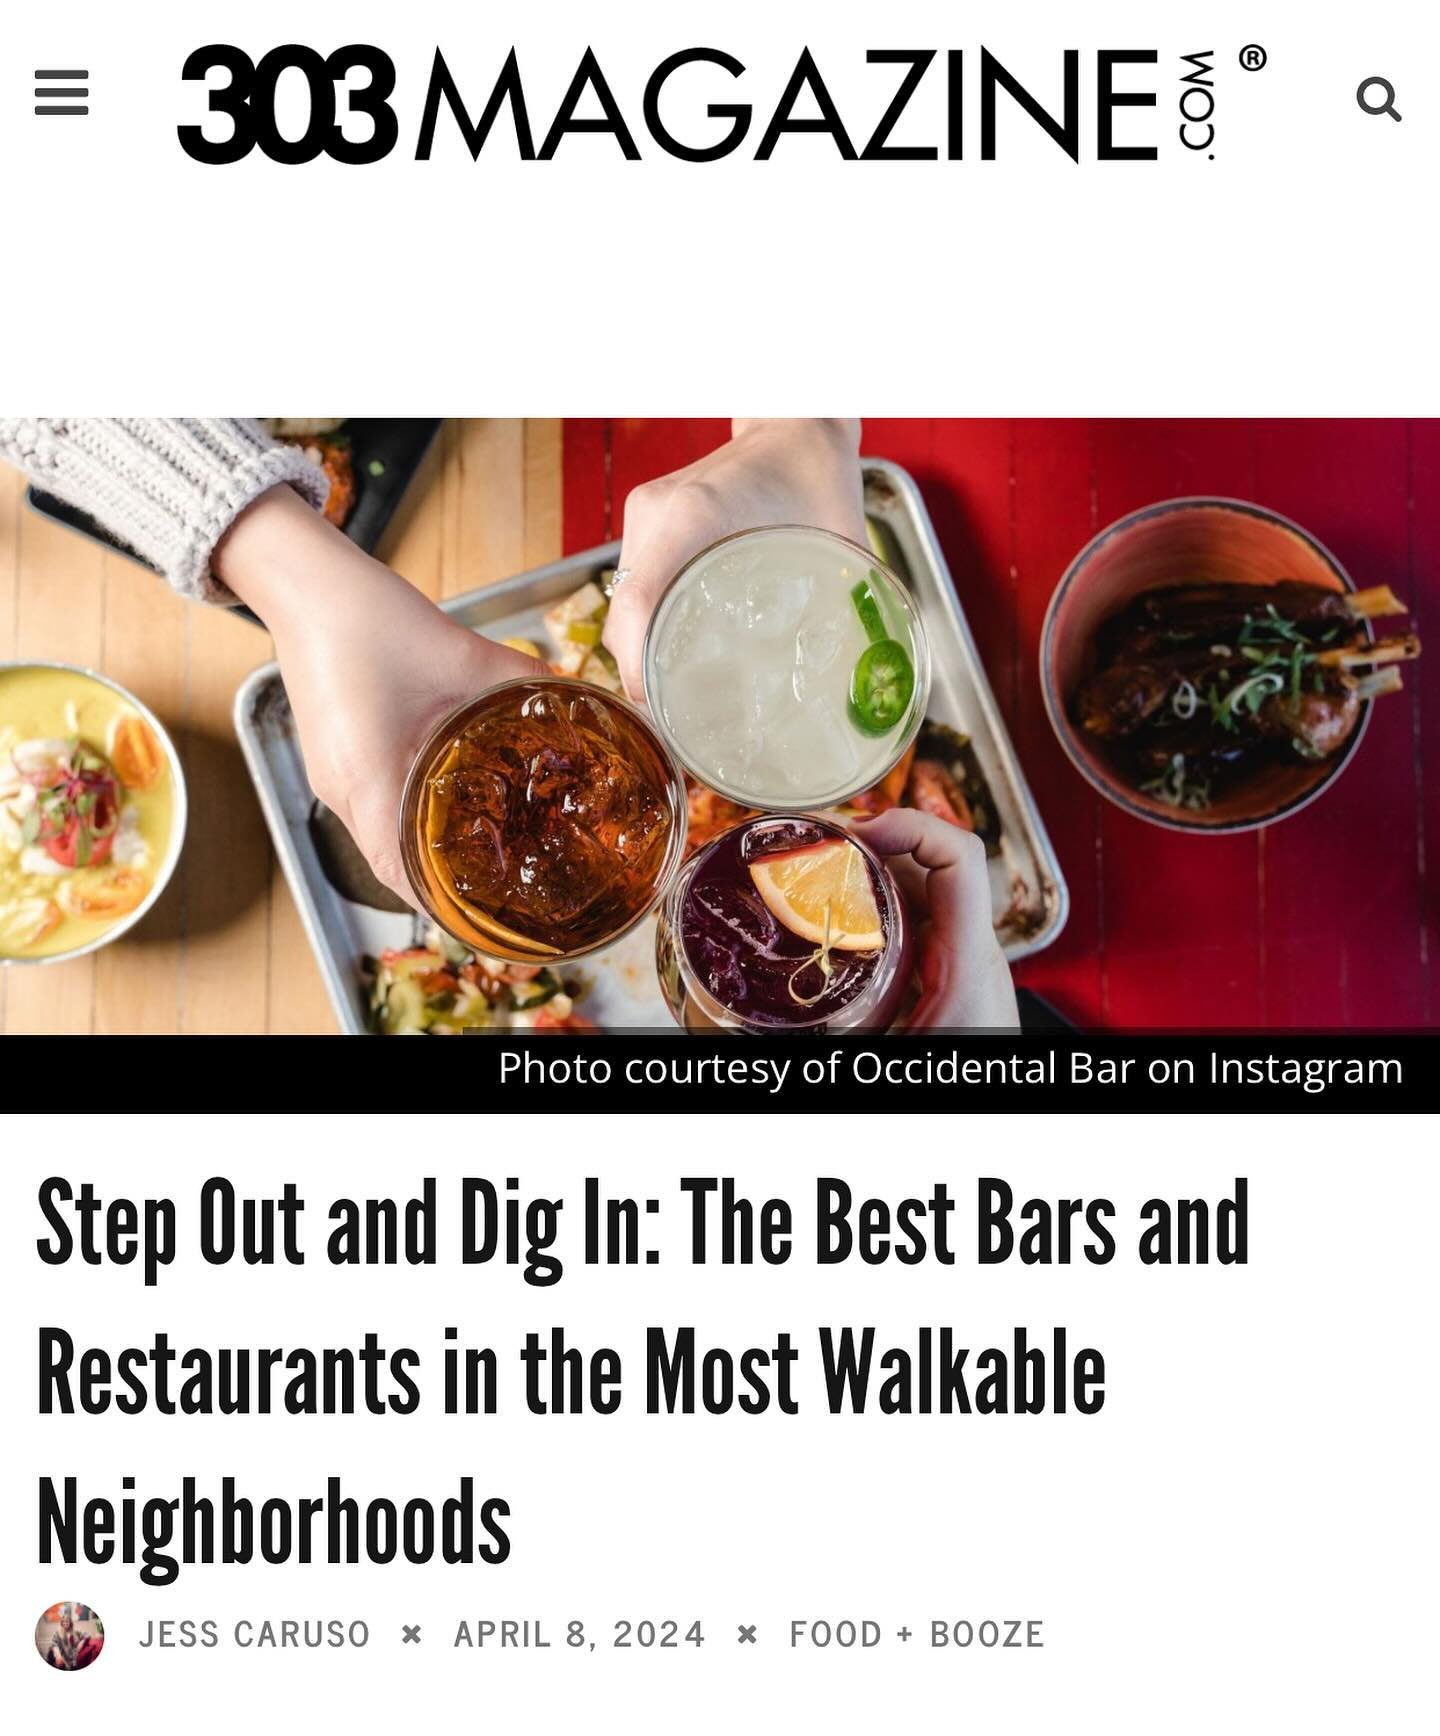 Walking, riding, gliding, sprinting, maybe even a nice leisurely stroll! We don&rsquo;t care how you get here, as long as you do! Thanks @303magazine for including us in this great little write up on all the walkable action in our lovely neighborhood